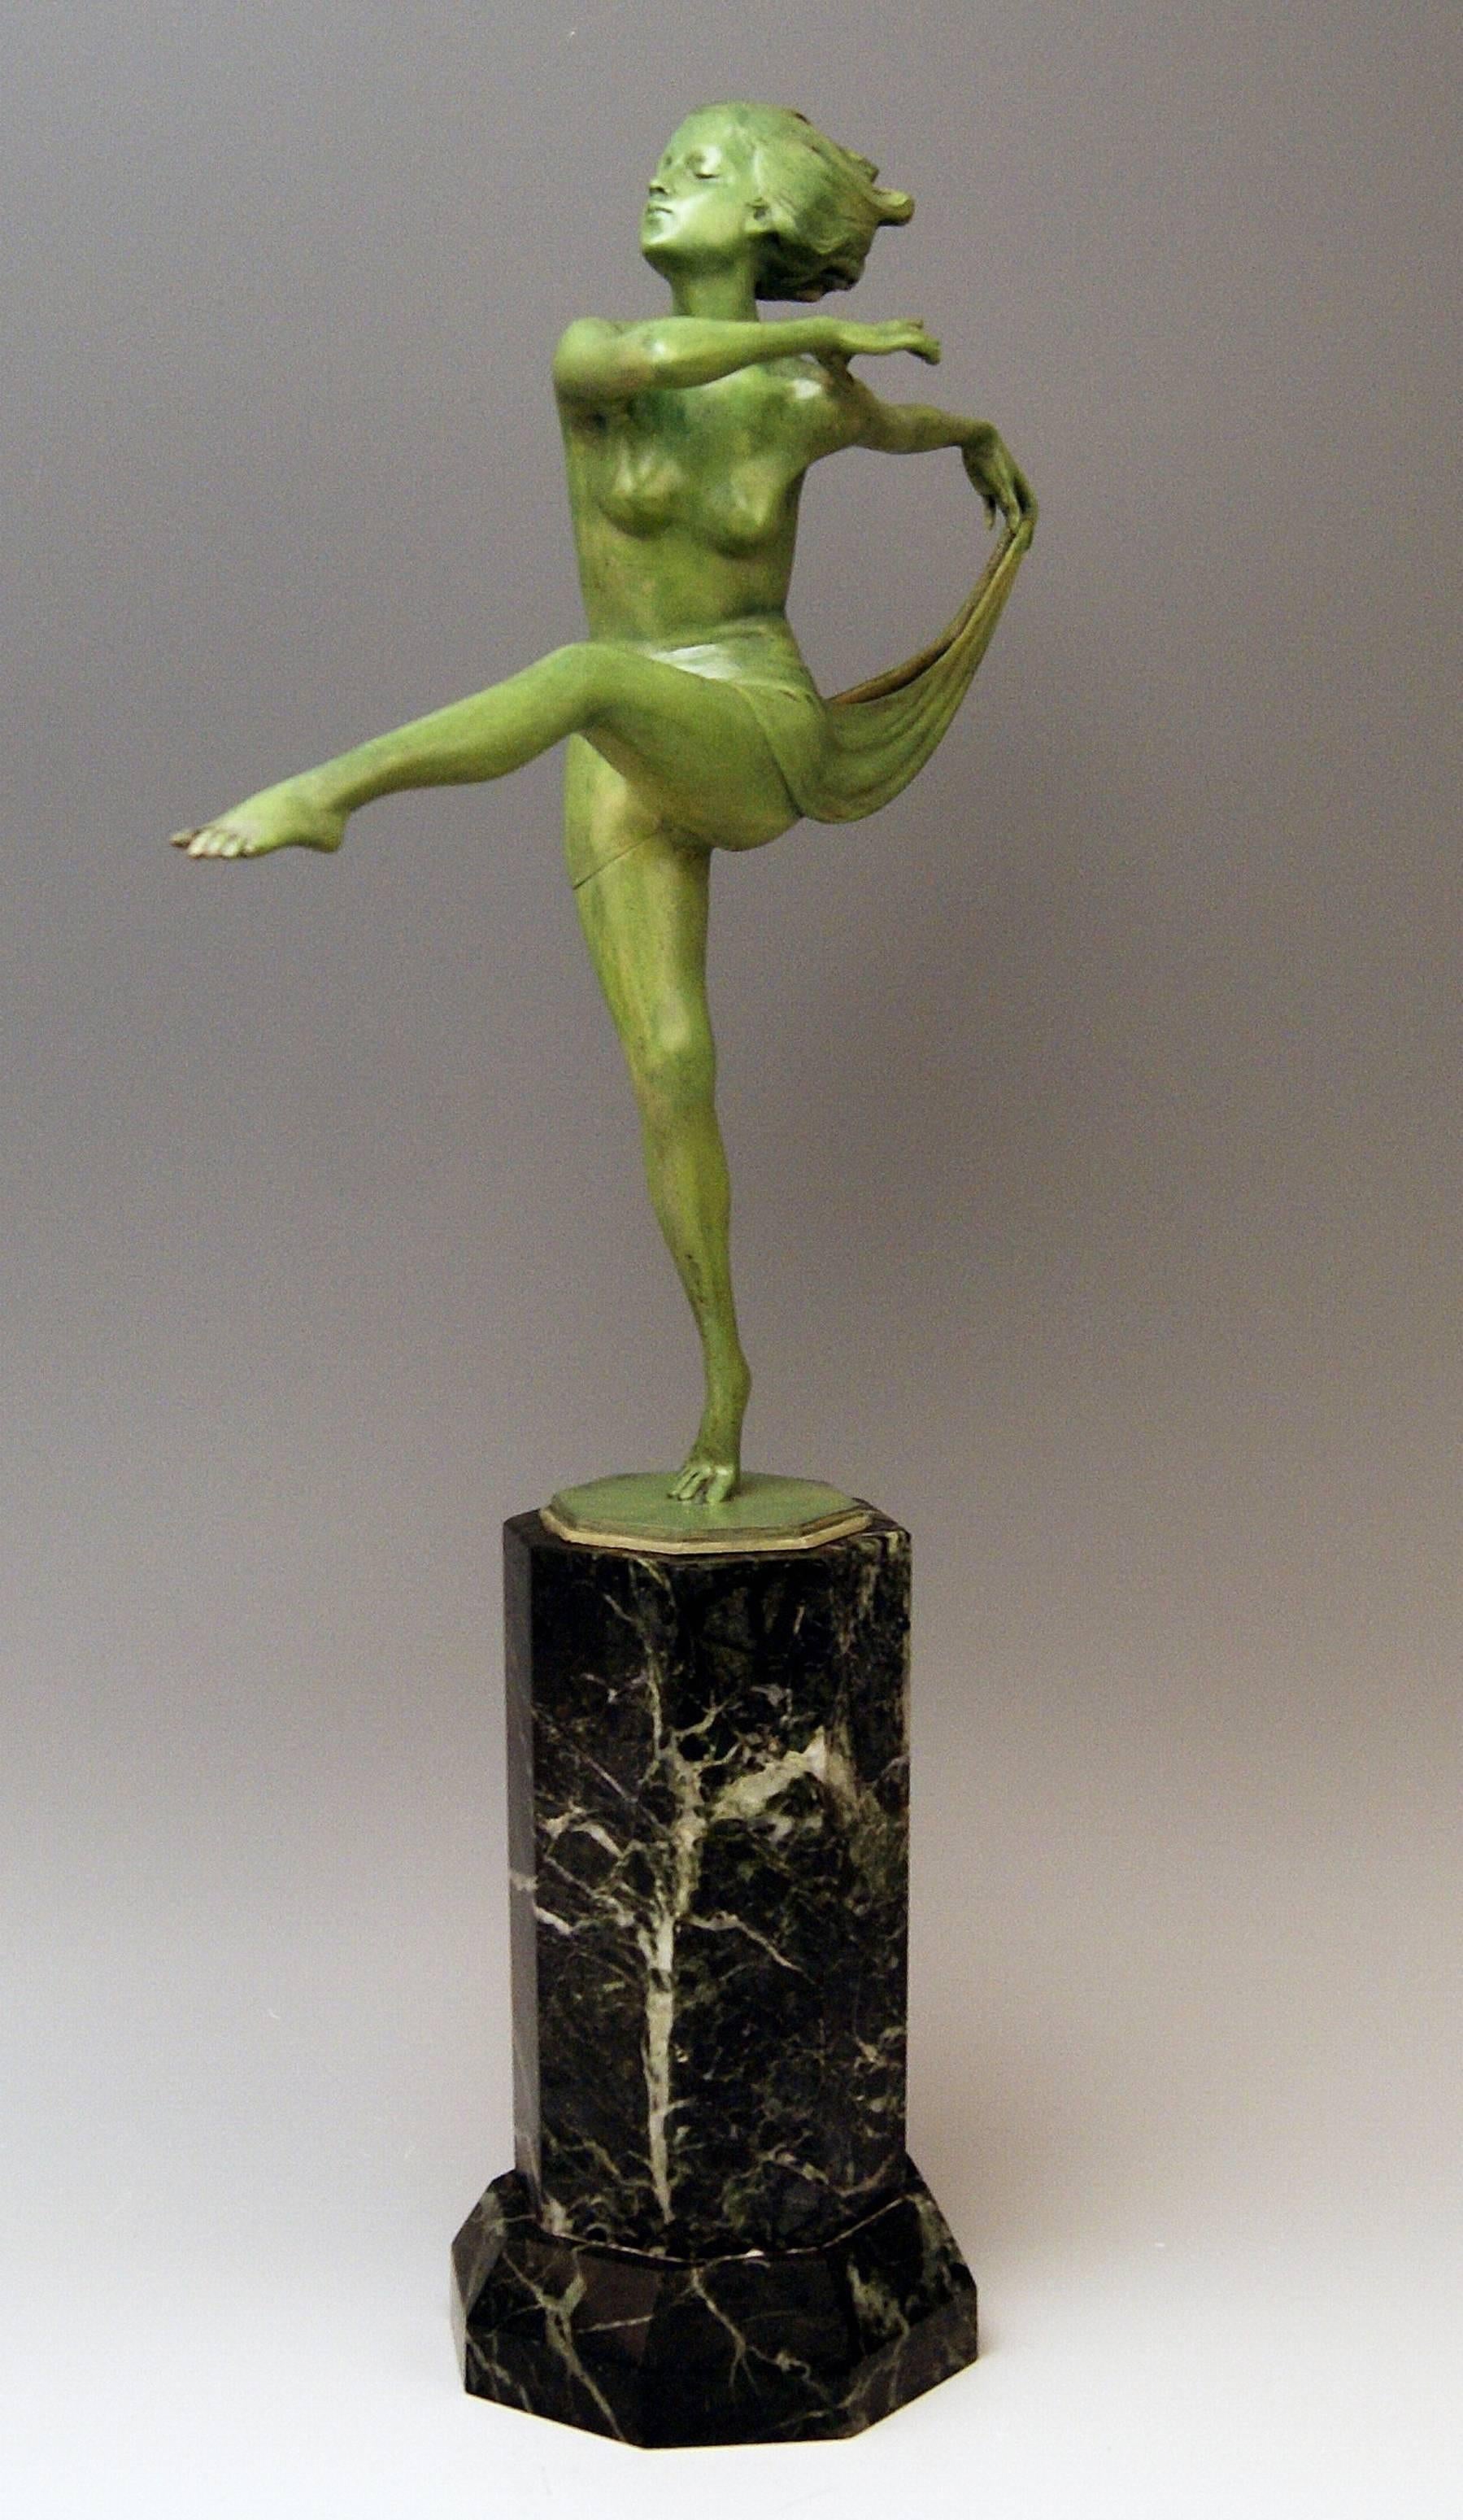 Vienna bronze finest Art Deco lady nude dancer

Material and technique: bronze / bronze casting / mold, with green patina

Designed by Josef Lorenzl (1892 - 1950) / one of most important designers having been active for Goldscheider manufactory